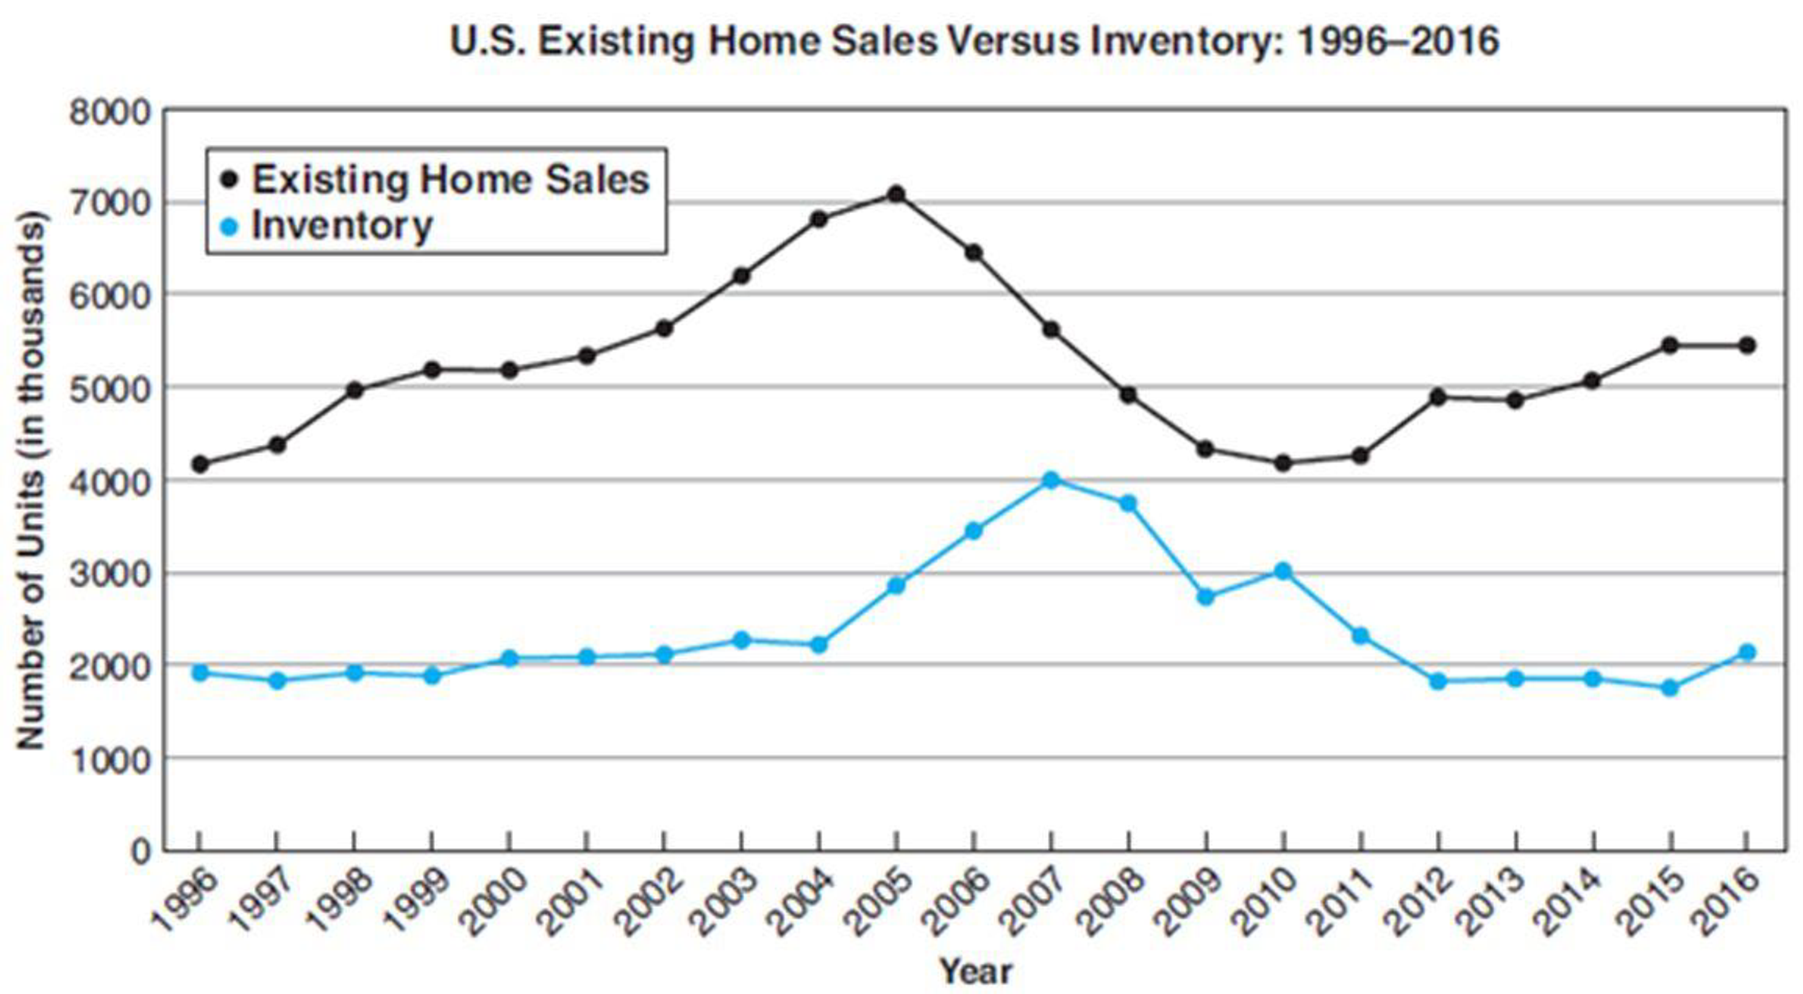 Chapter 12.1, Problem 7AE, Construction The following double-line graph compares the number of existing home sales to the 